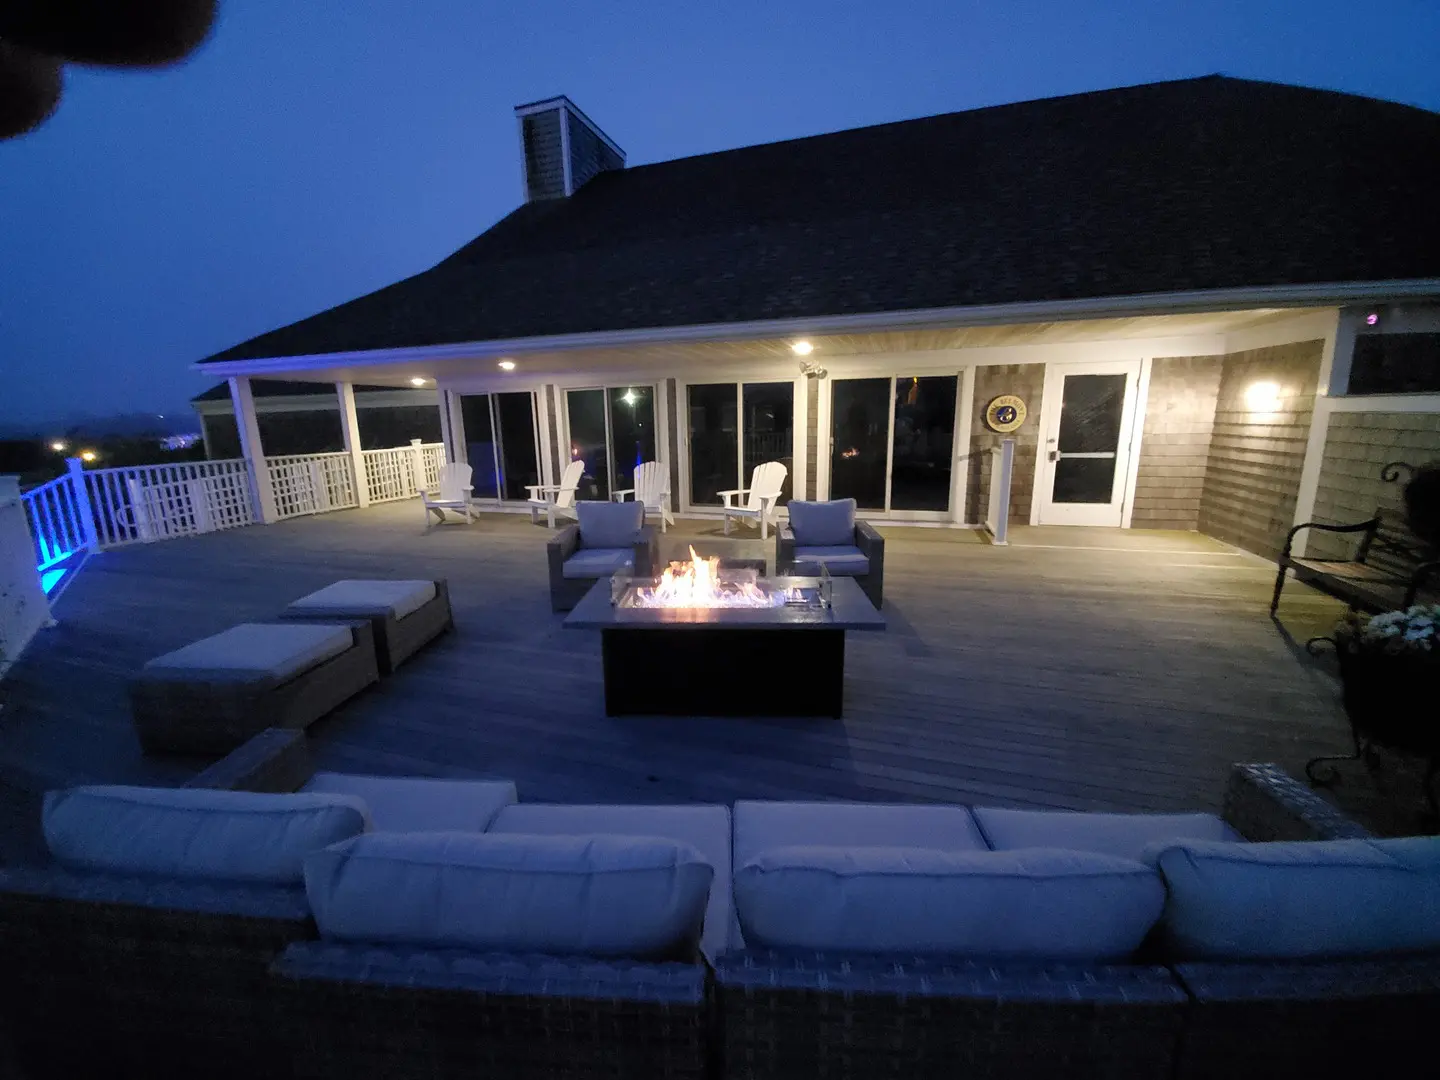 A patio with couches and fire pit at night.